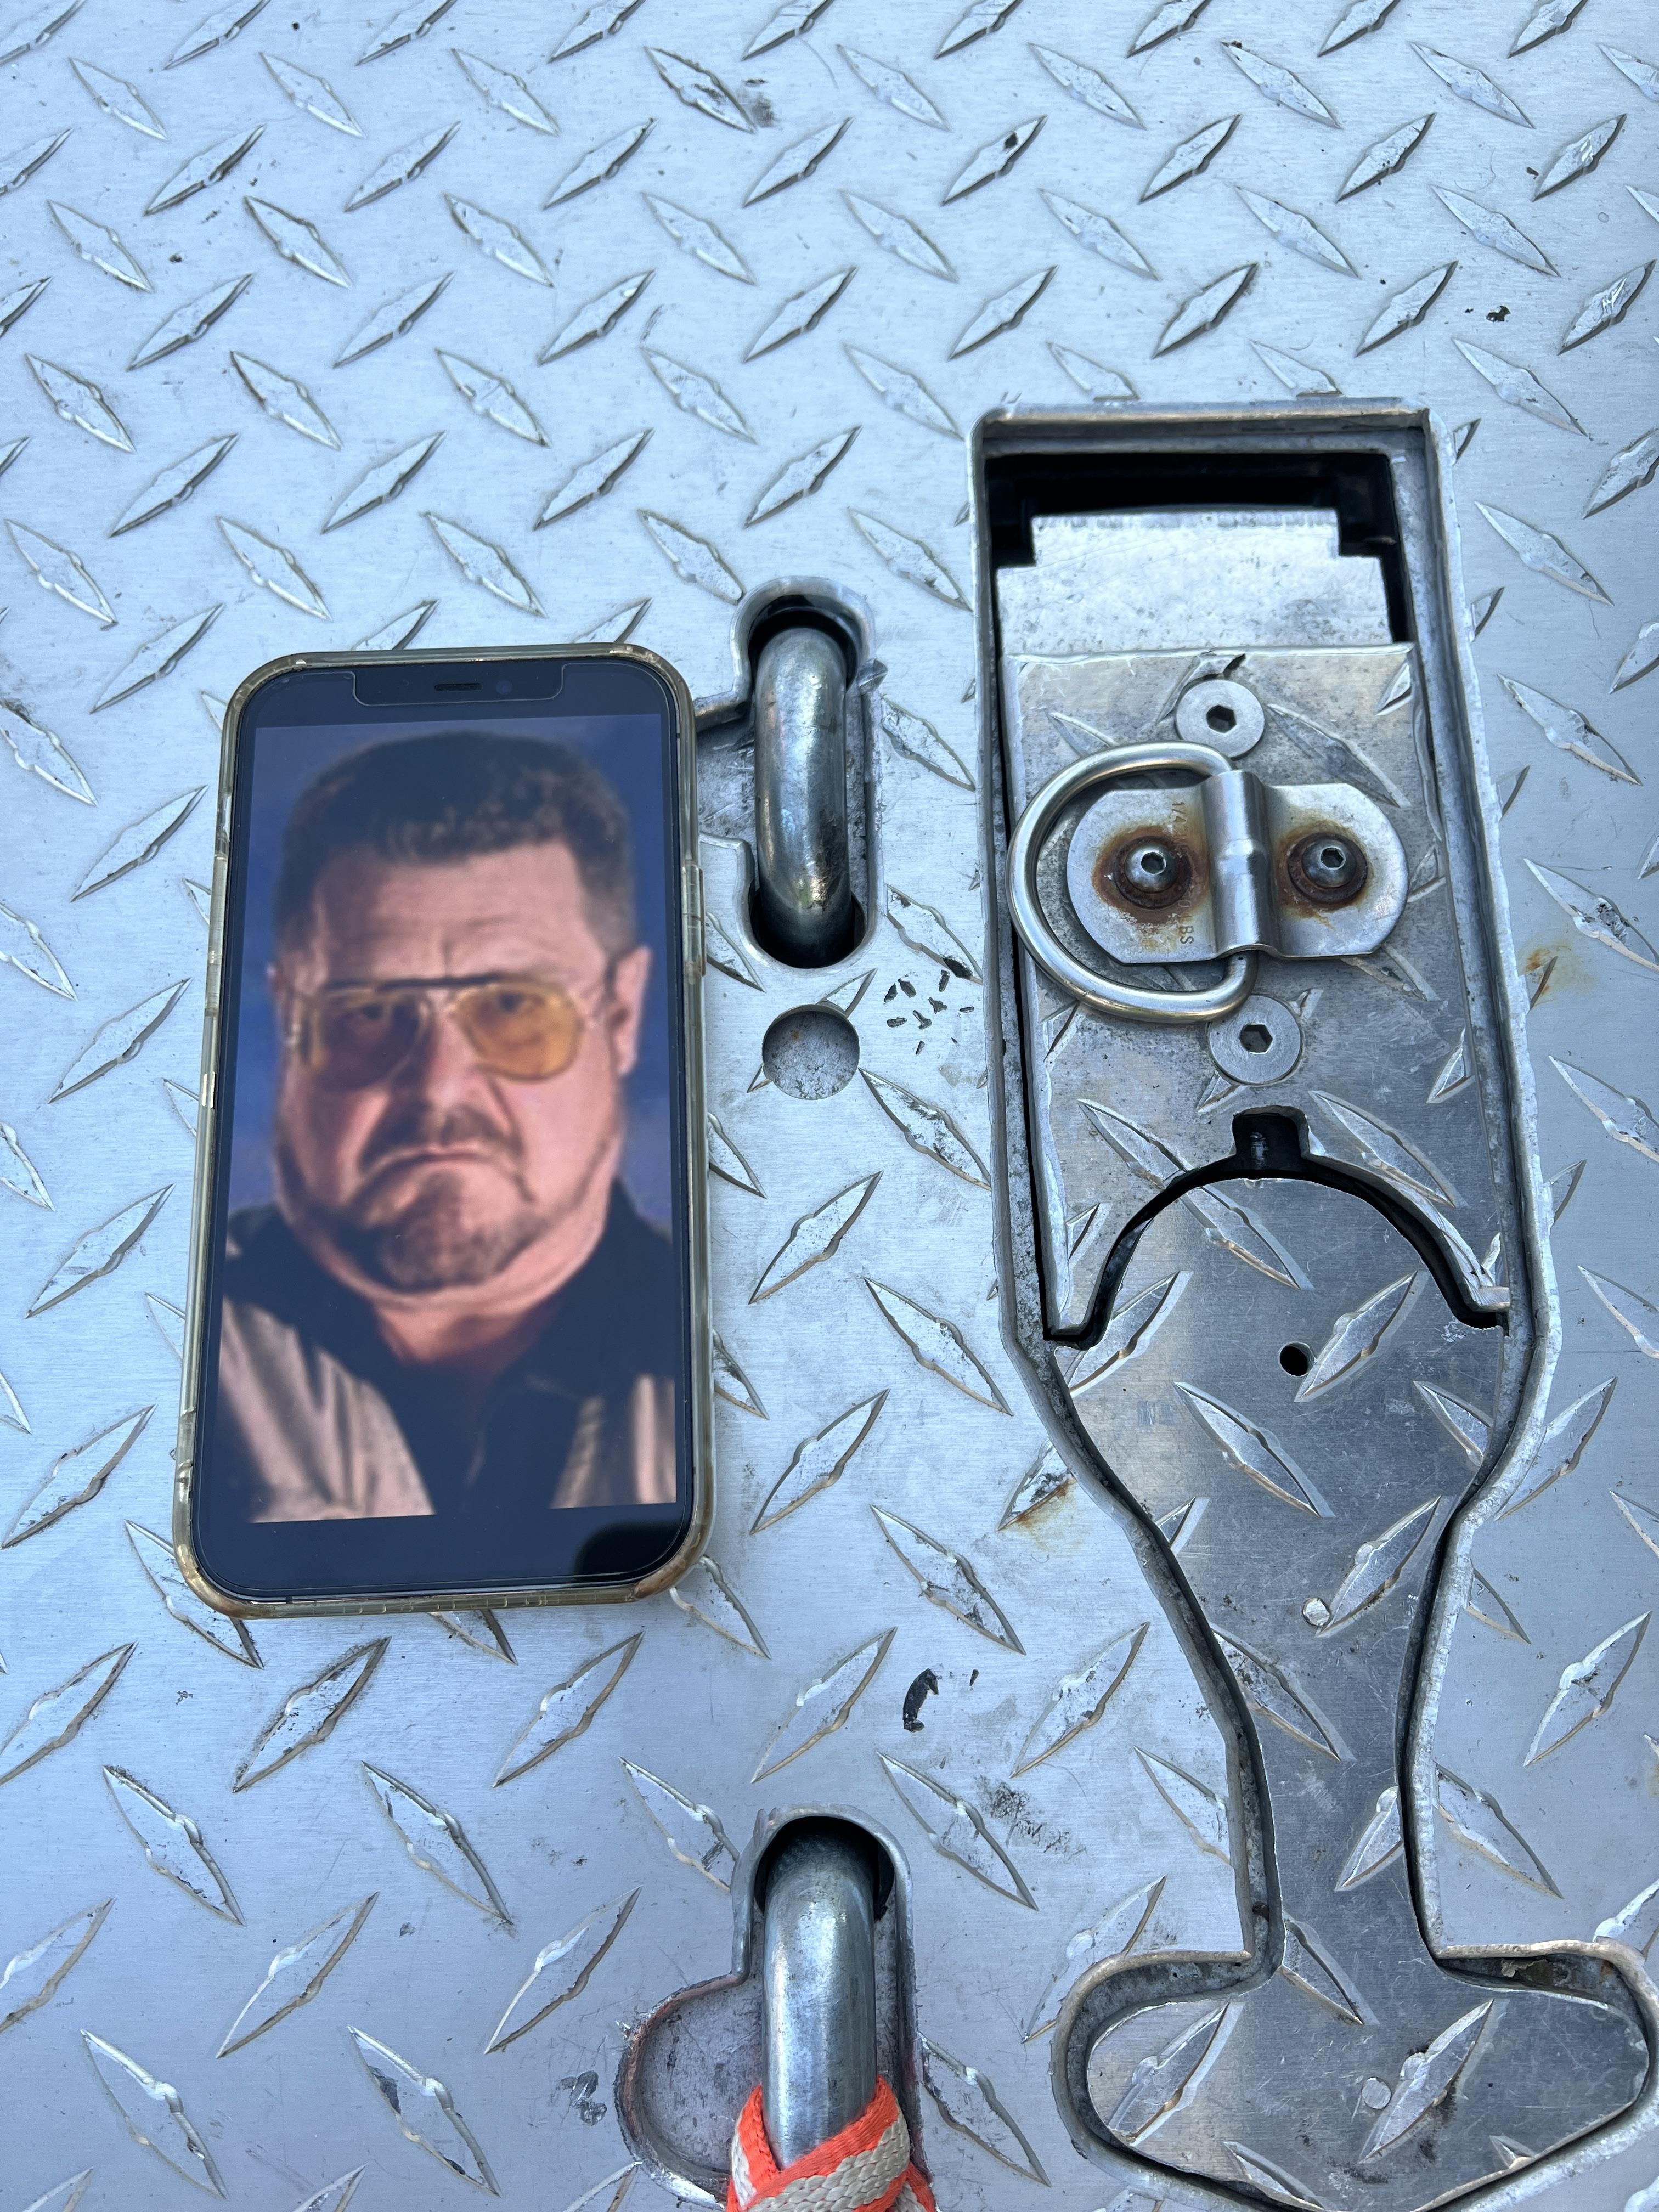 This is a tie down on a truck I was working on today. Amazing resemblance.